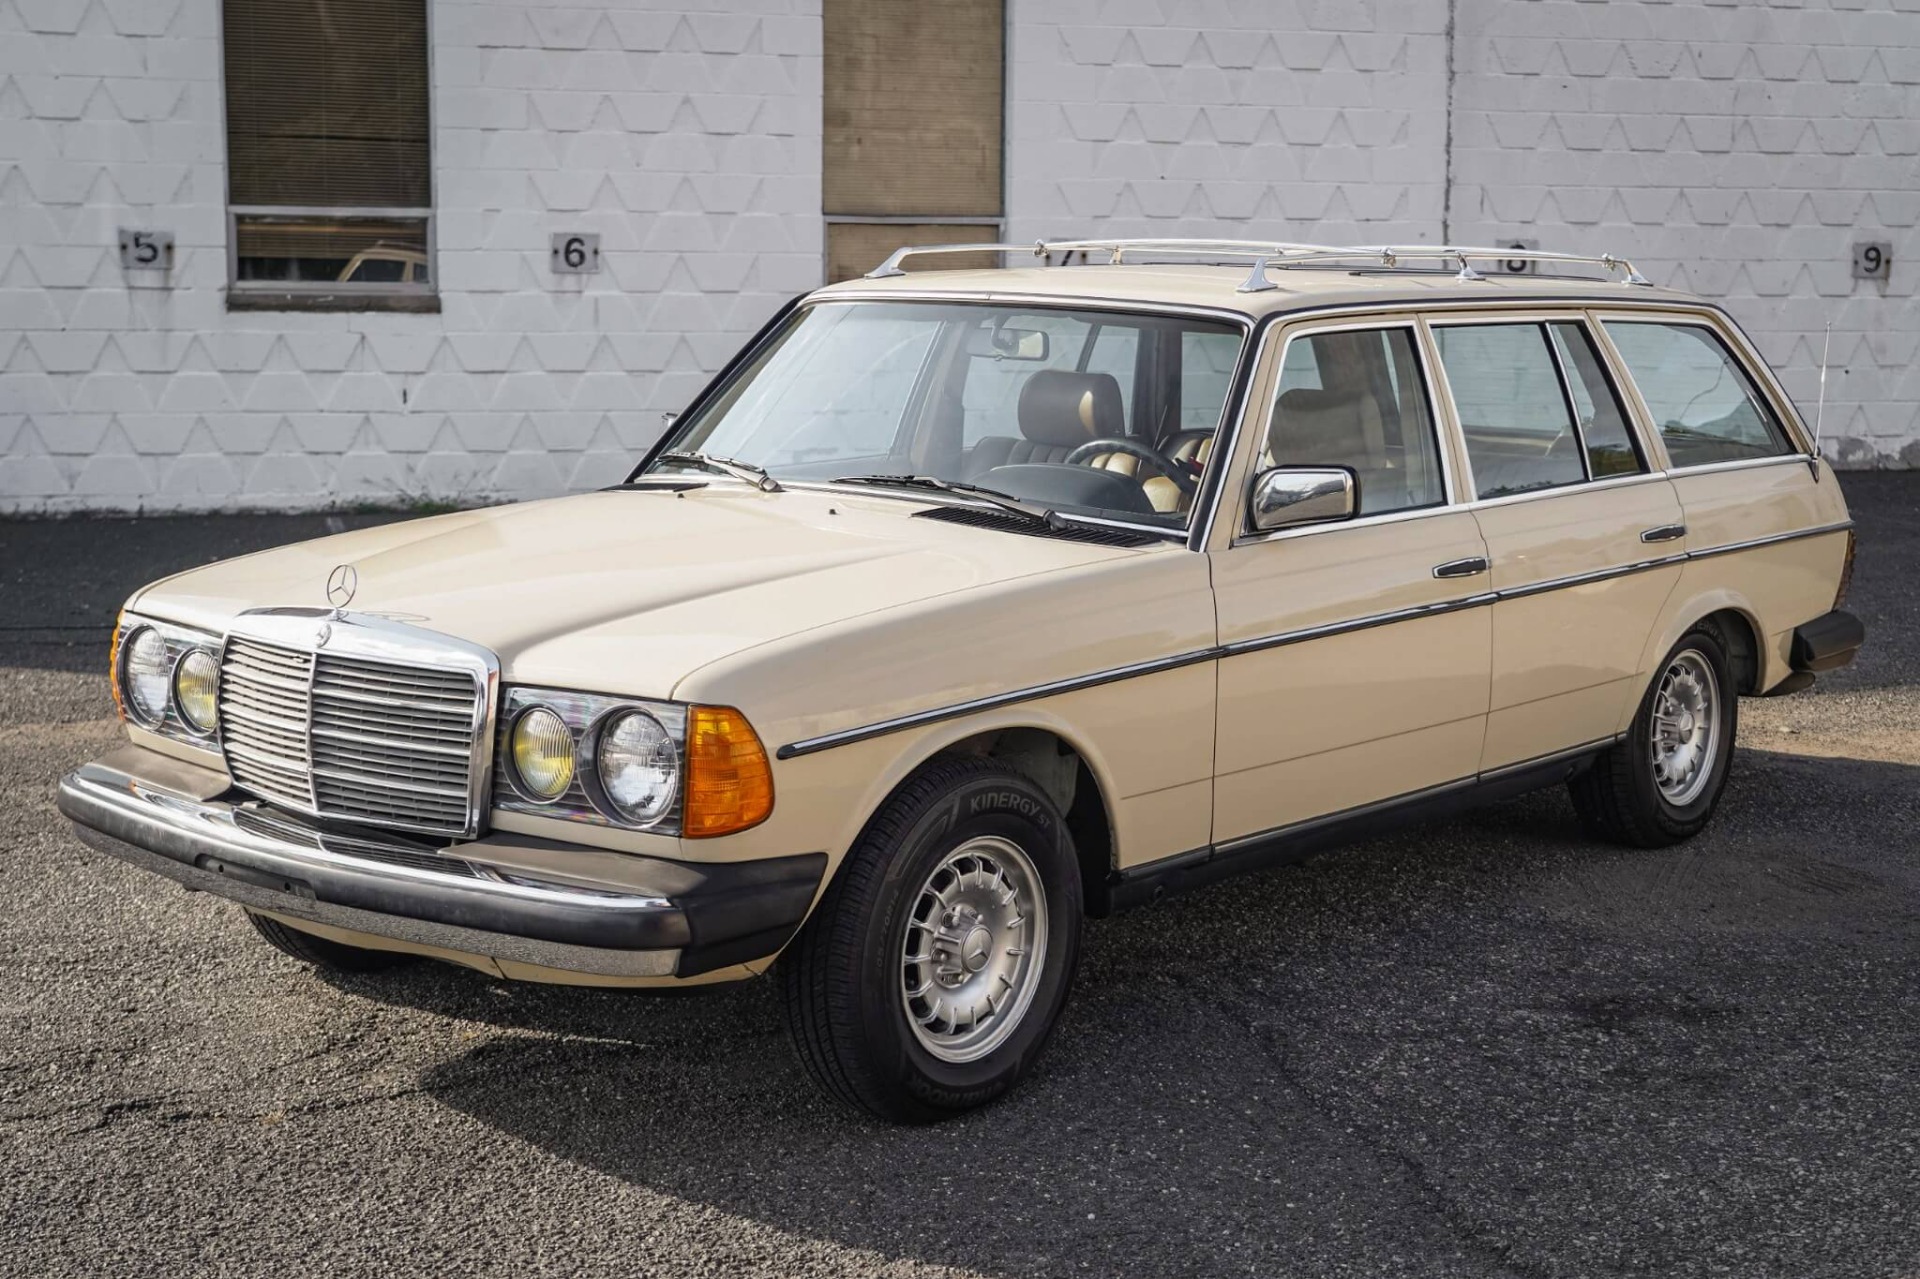 Used 1984 Mercedes-Benz 300 TD PCARMARKET AUCTION 300 TD | Oyster Bay, NY